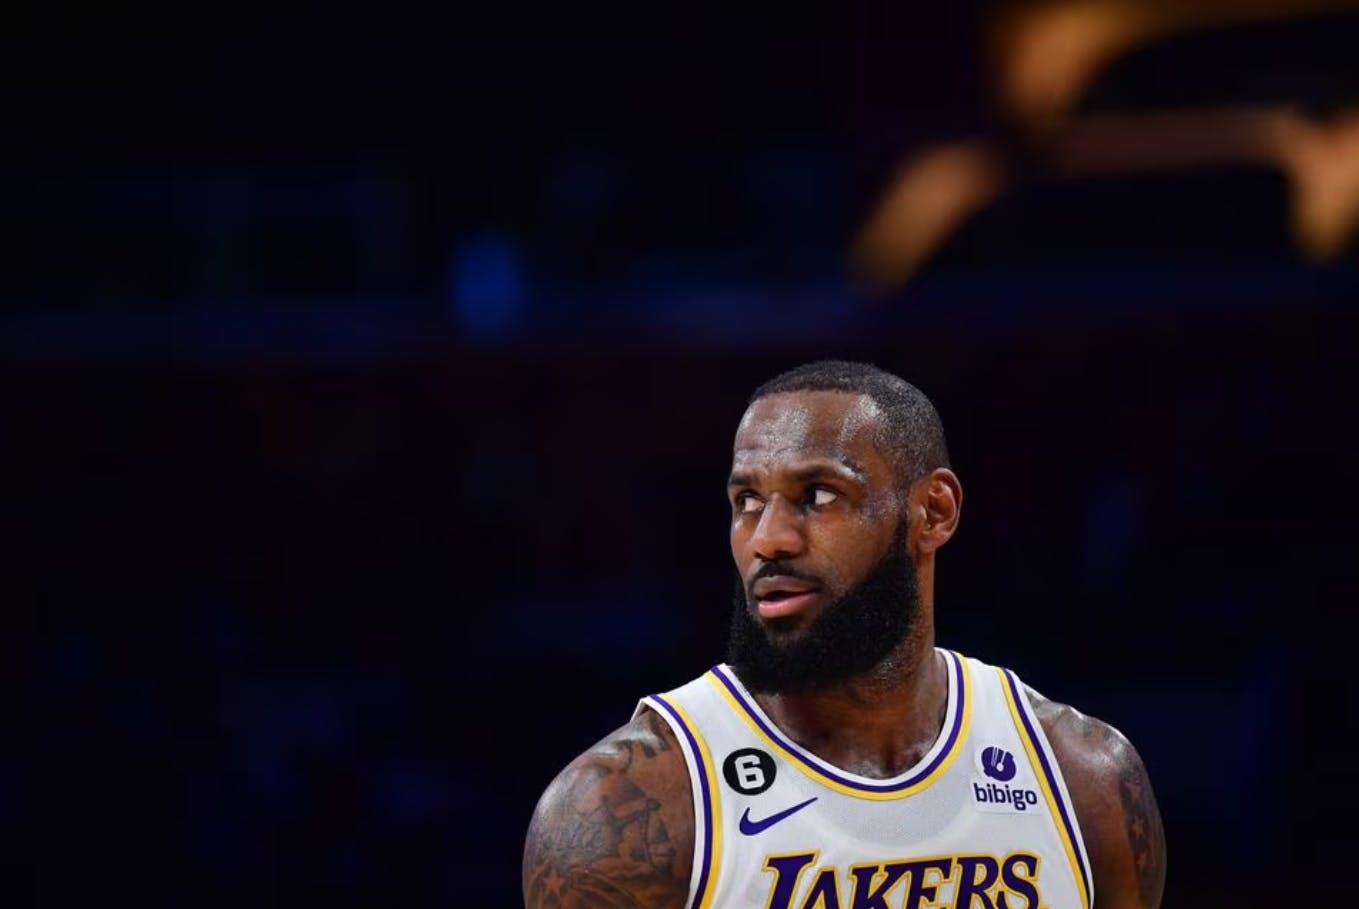 LeBron James gets roasted by former champion for Instagram post, other NBA guys chime in 